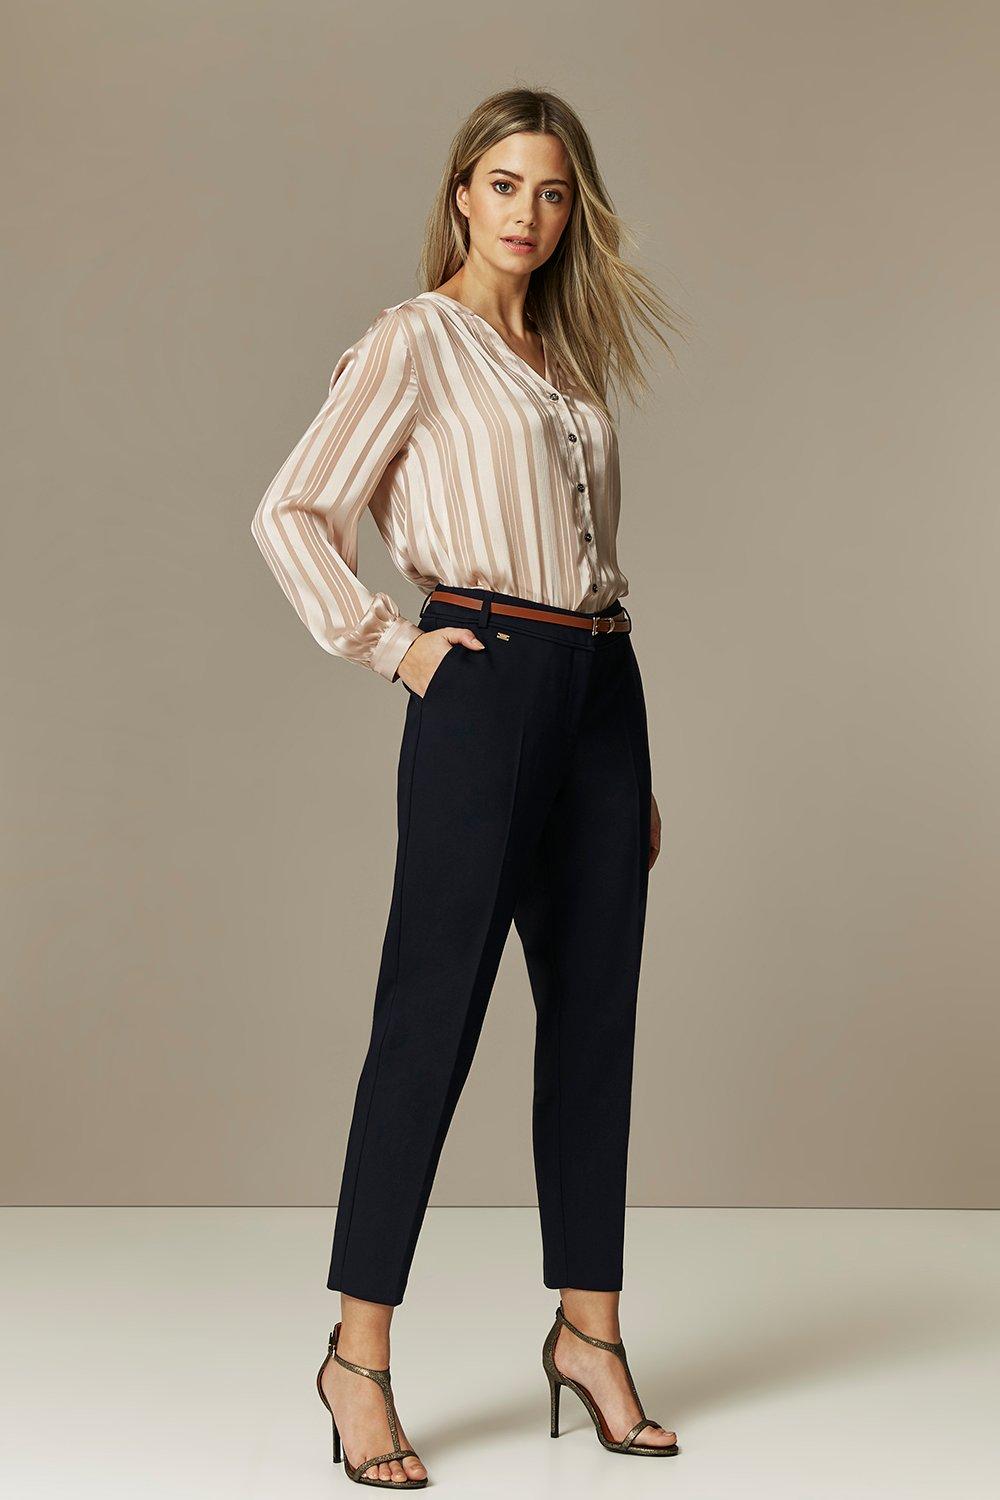 Staple Navy Trousers For Your Work Wardrobe. An Elegant Navy Hue Makes A Sophisticated Change From Regular Black, Whilst Cigarette Leg And Belted Design Mean They'Re&Nbsp;Sure To Flatter. Tuck In A Chic Blouse And Team With Strappy Heels For Desk To Drink